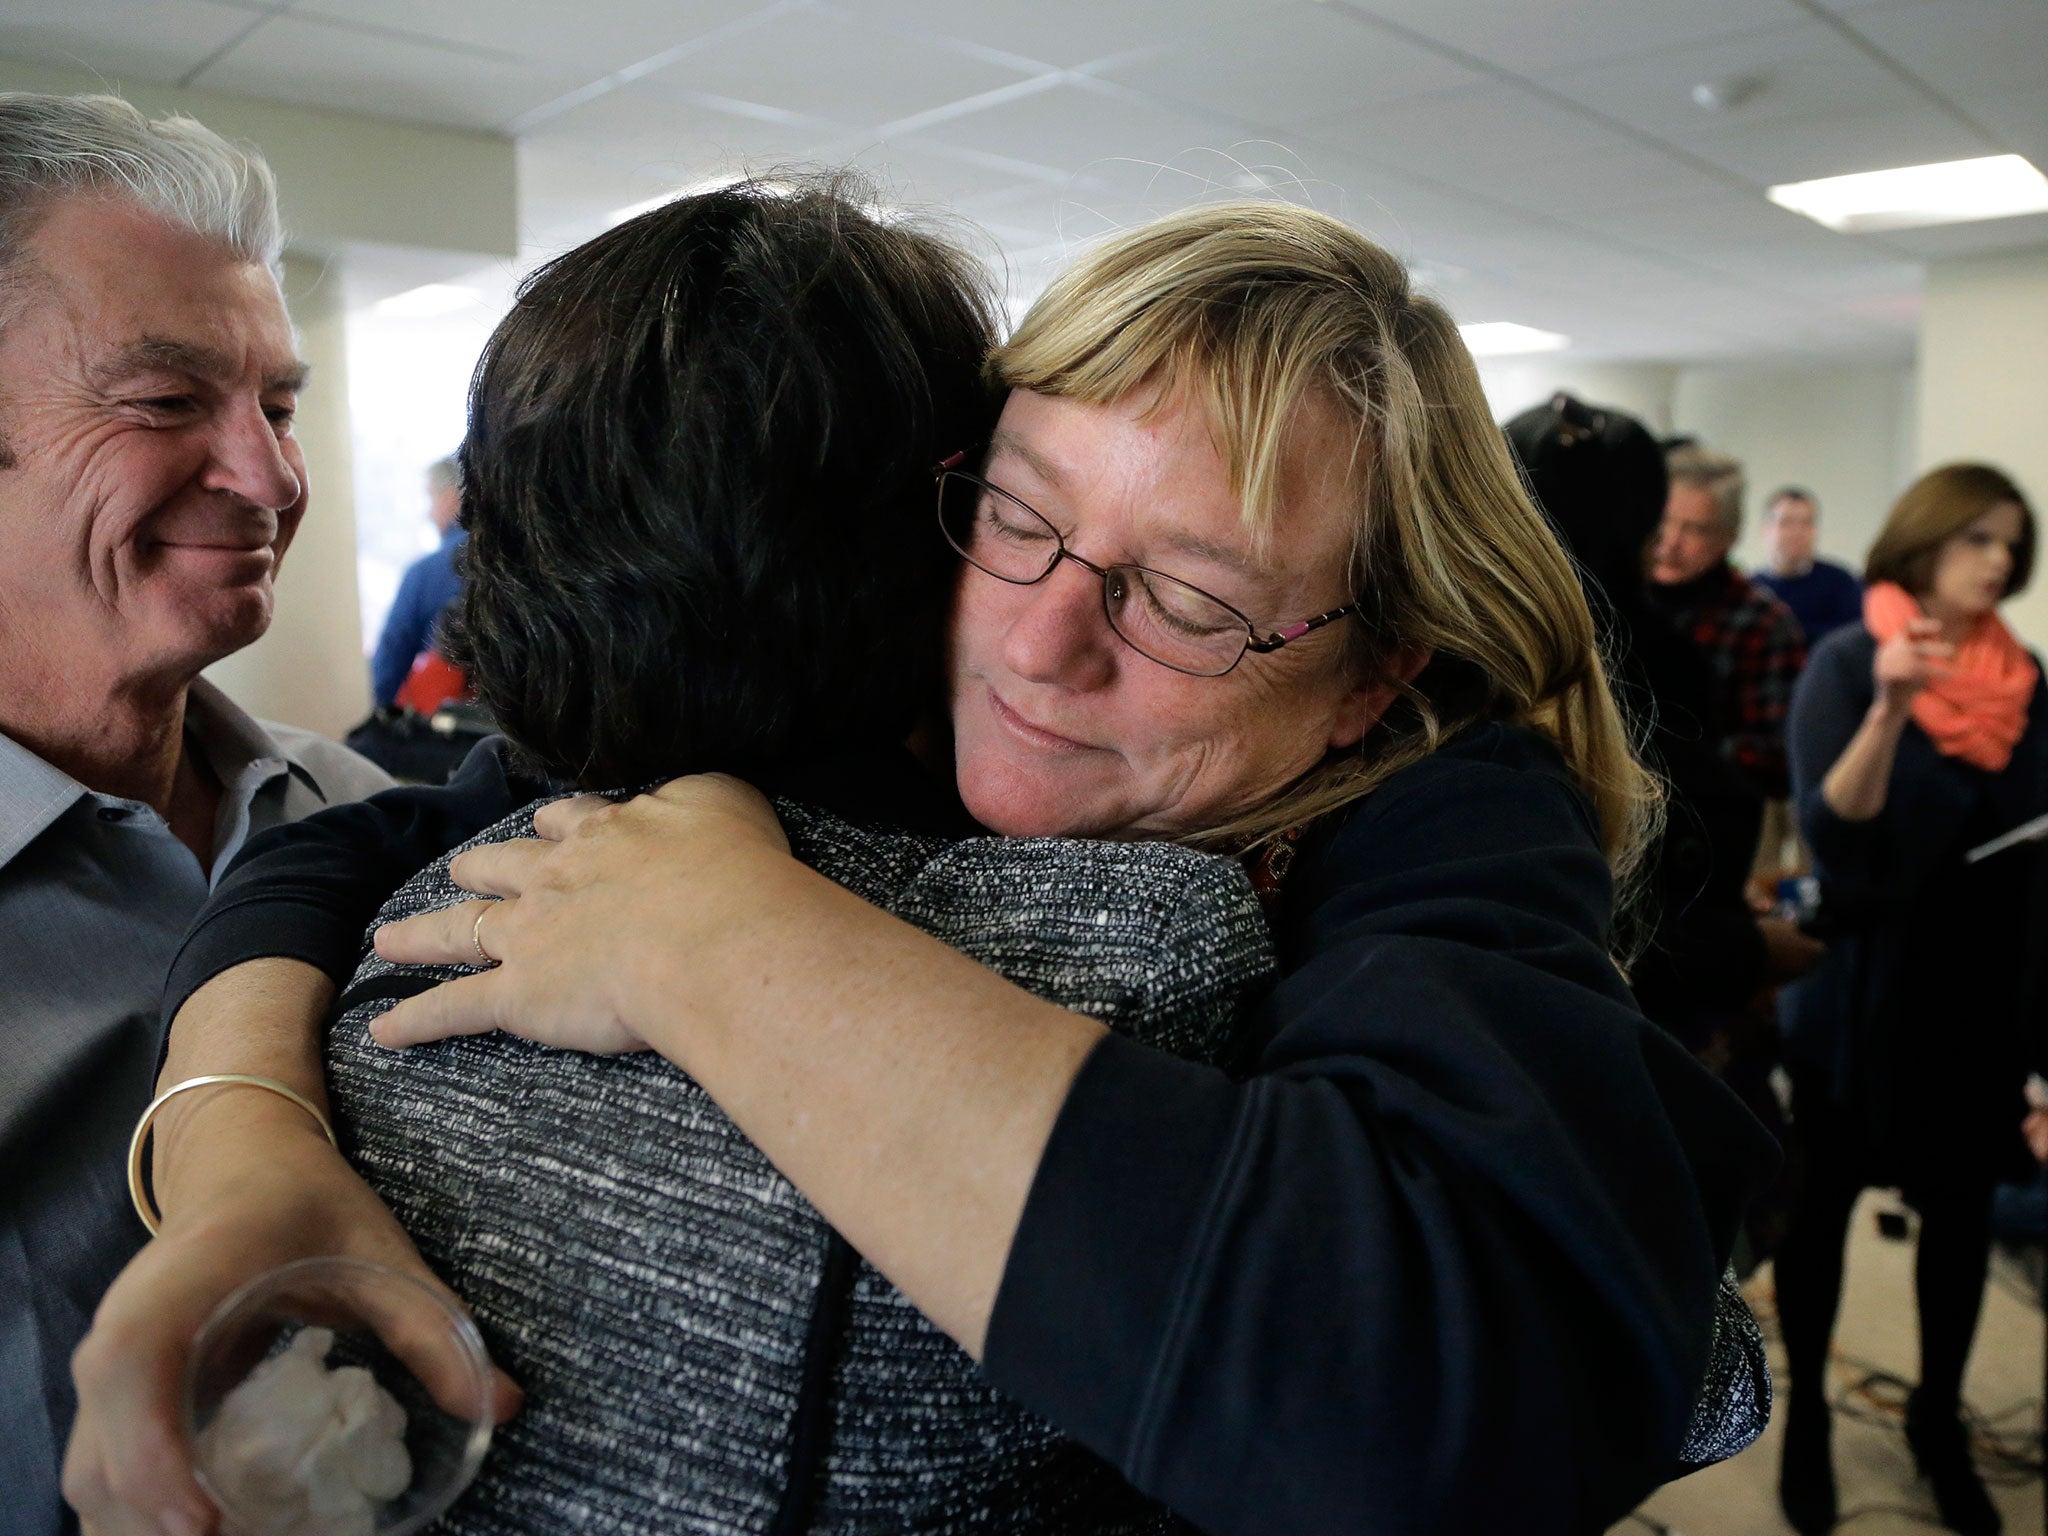 Katie Wales Lovkay, right, who attended St. George’s School from 1977-1980, hugs a former classmate, following a recent news conference about sex abuse at the school